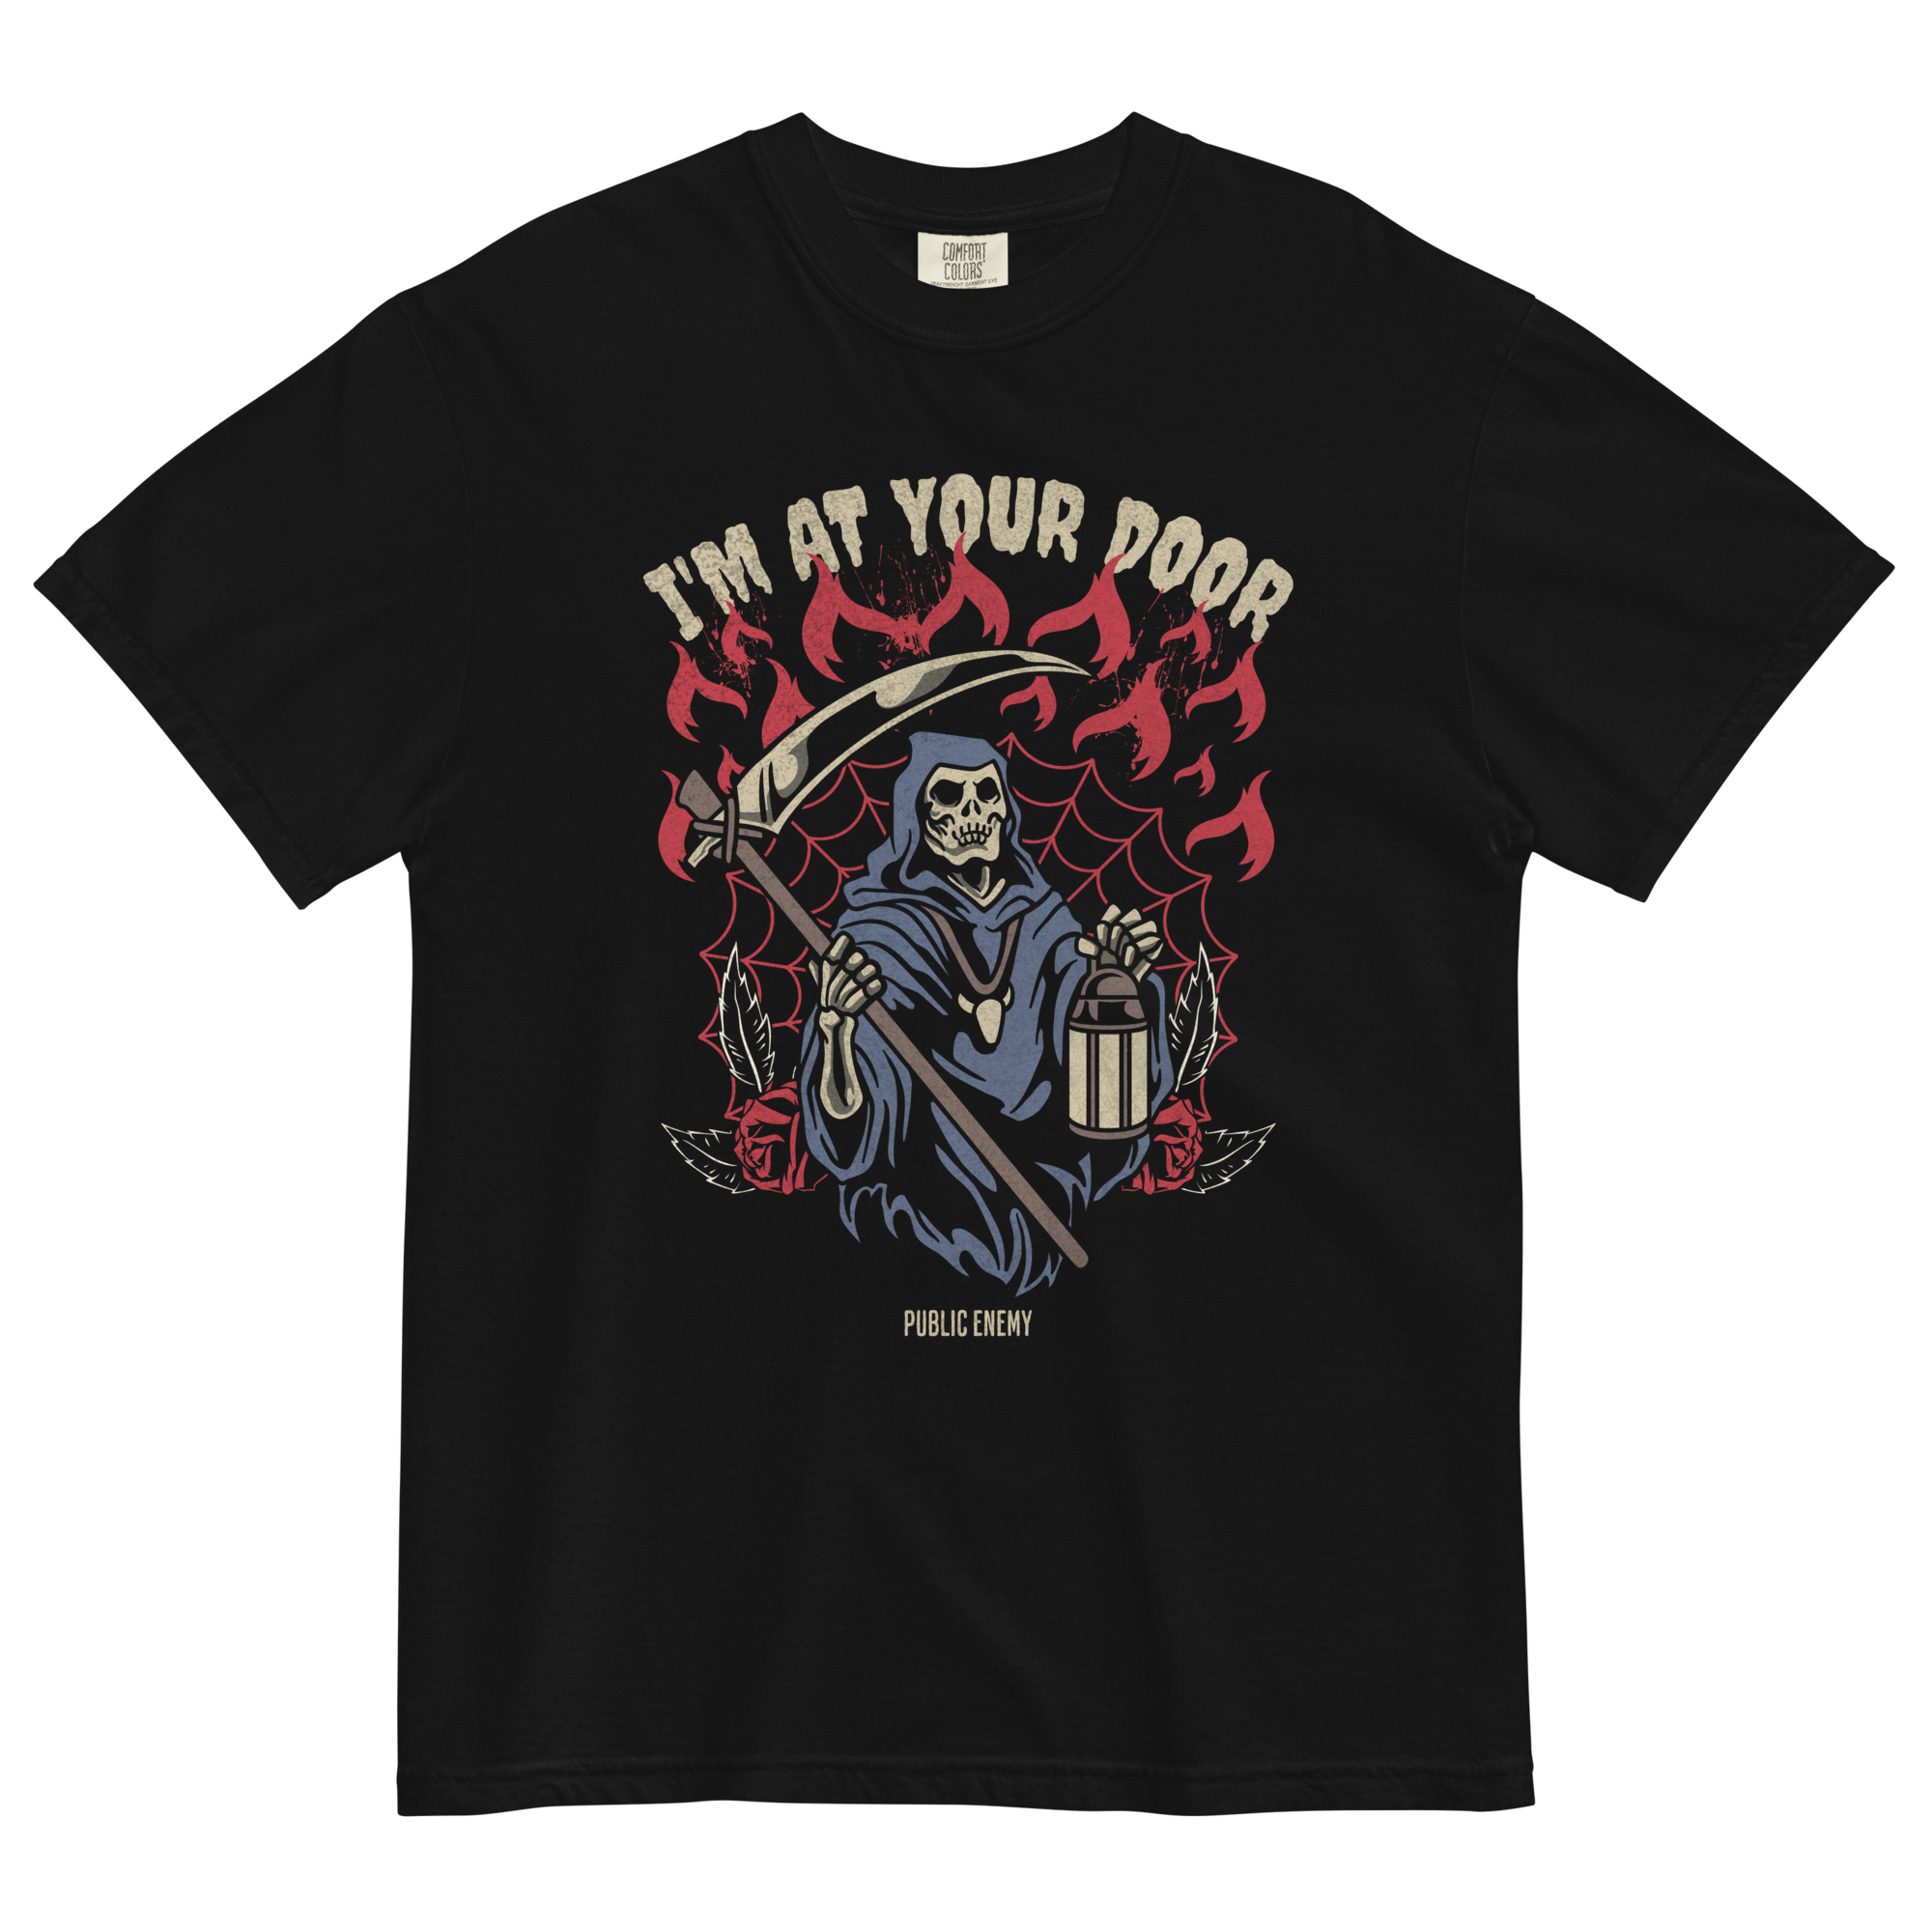 Grim Reaper T-shirtDiscover the comfort and style of our 100% cotton men's Grim Reaper T-shirt. Perfect for layered streetwear looks. Edge it up today! • 100% ring-spun cotton • Fabric weight: 6.1 oz/yd² (206.8 g/m²) • Garment-dyed • Relaxed fit • 7/8″ do